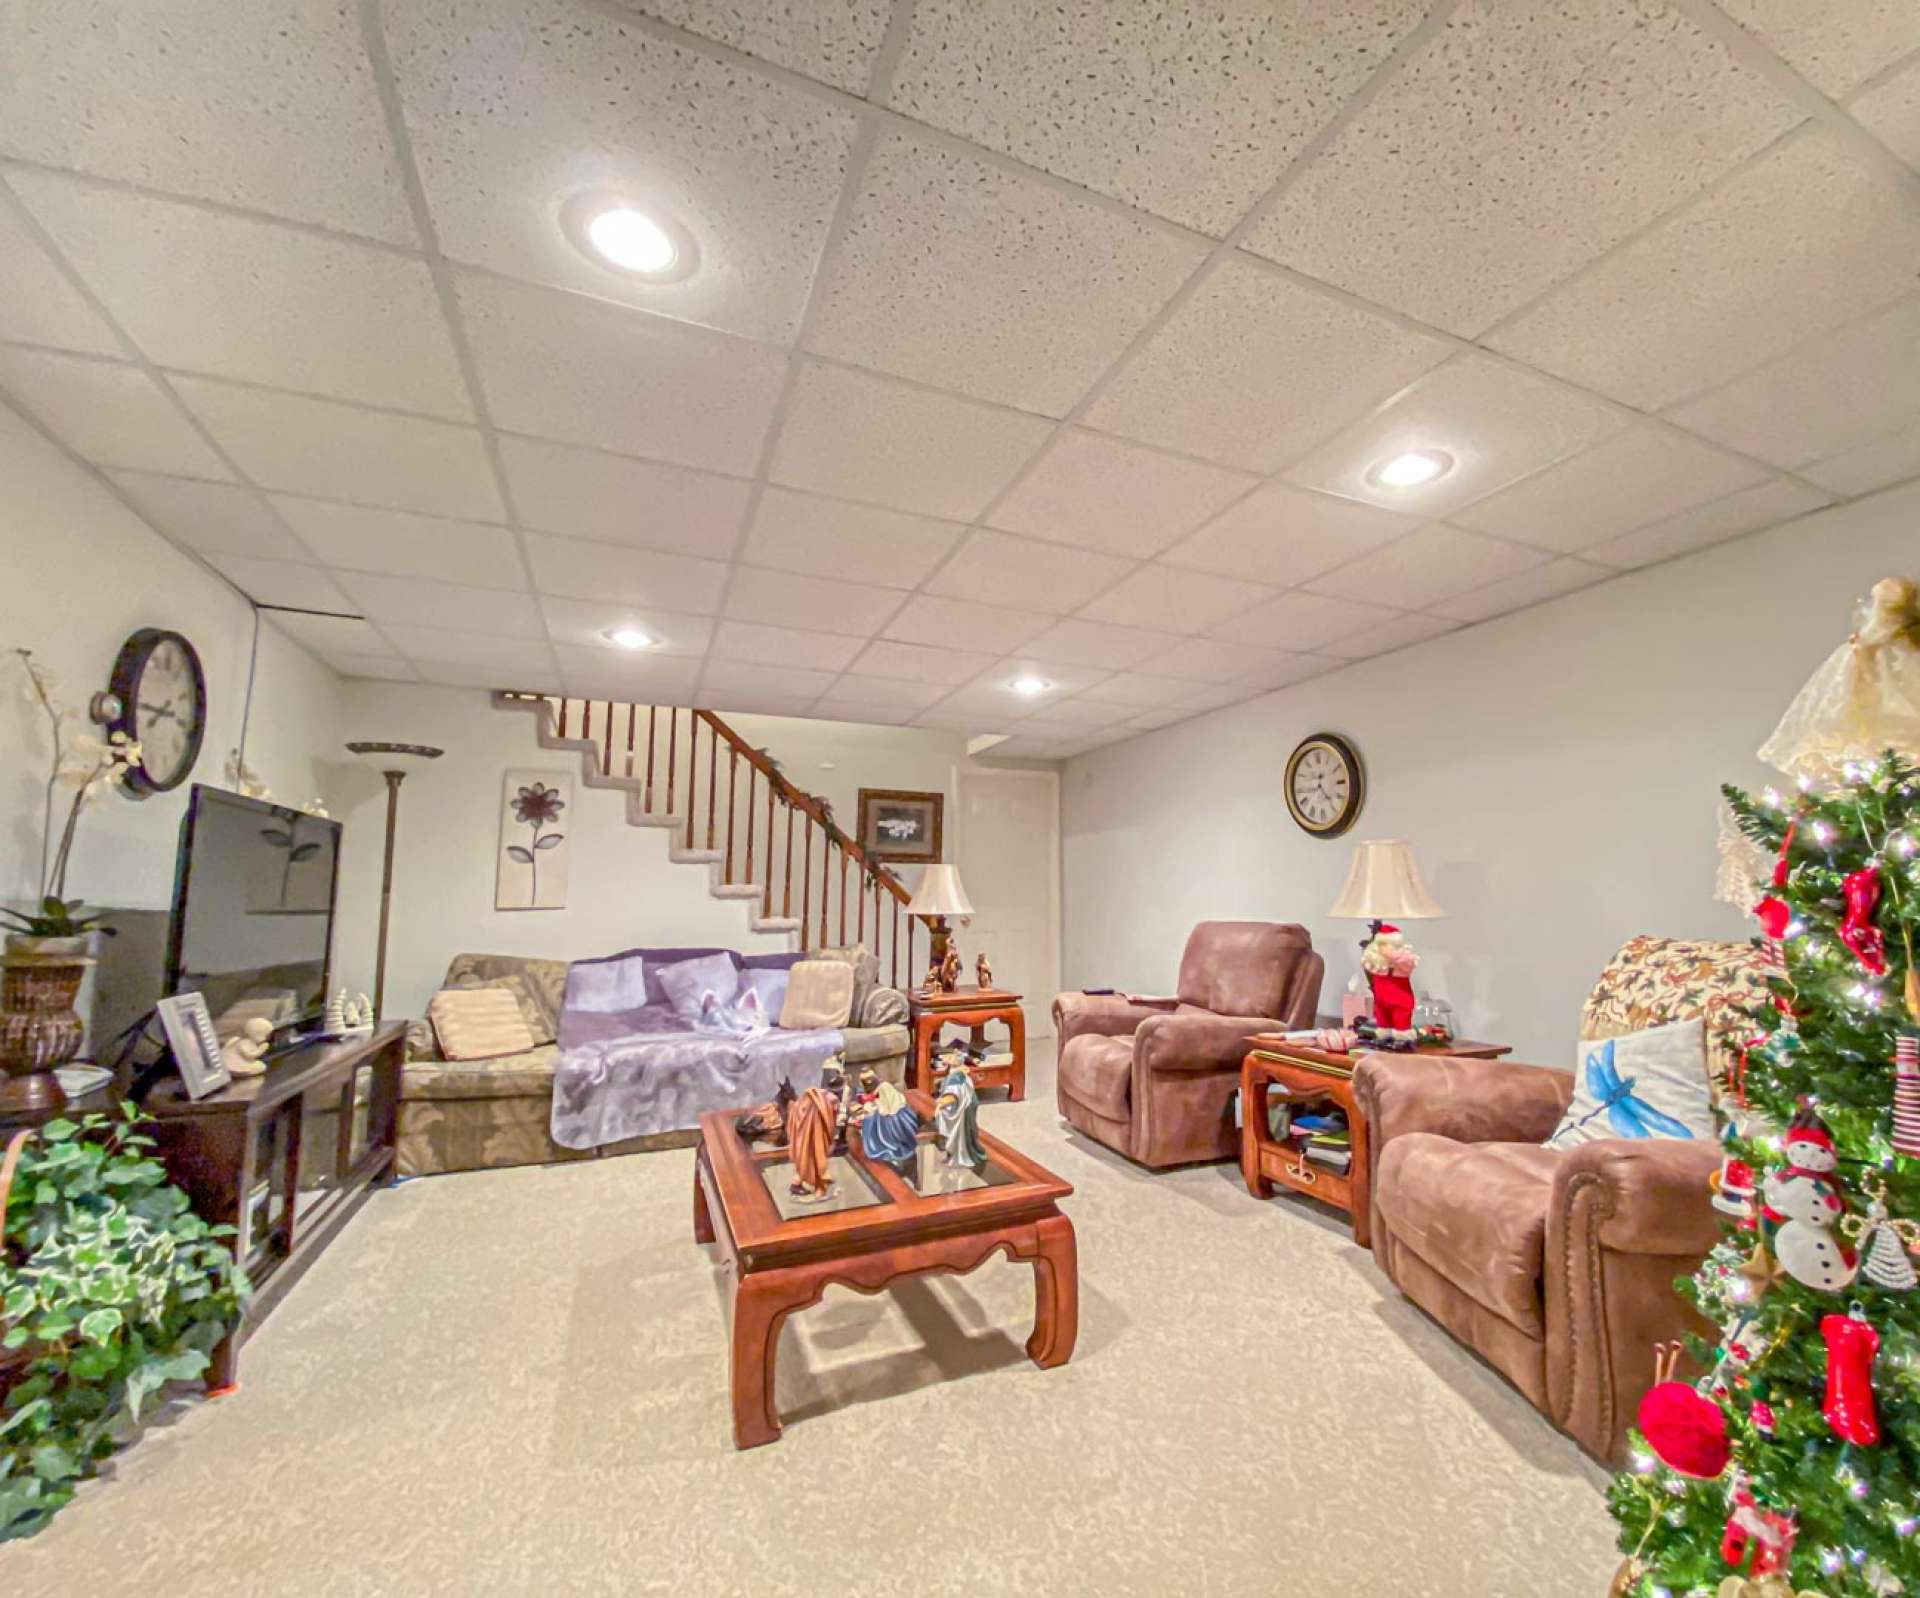 The full finished walk-out lower level is currently rented providing rental income.  This level features a large living area, dining area, kitchen, bedroom, full bath and laundry area.